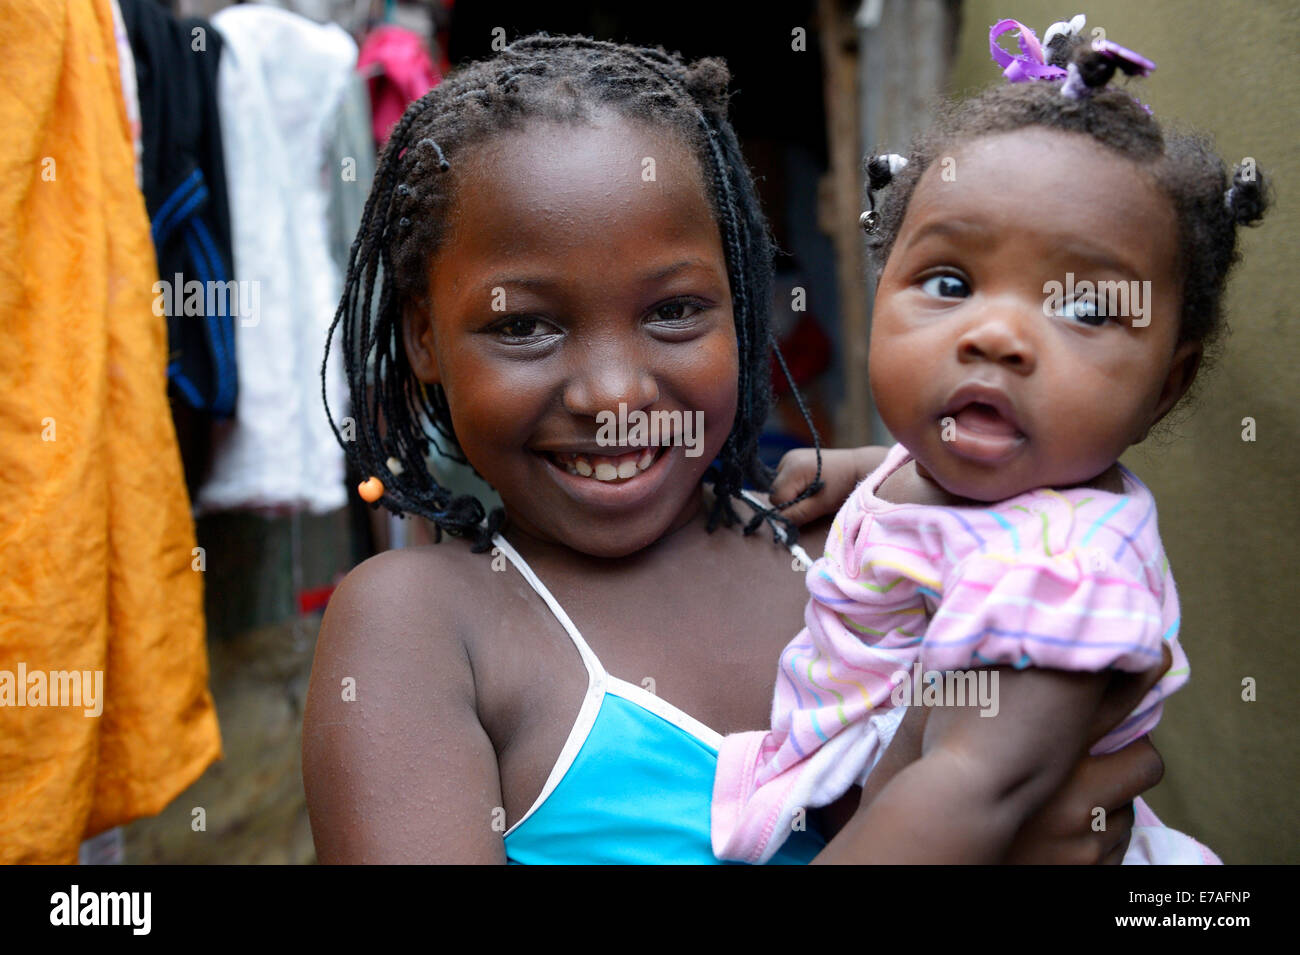 Girls, sisters, 9 years and 1 year, portrait, Camp Icare for earthquake refugees, Fort National, Port-au-Prince, Haiti Stock Photo